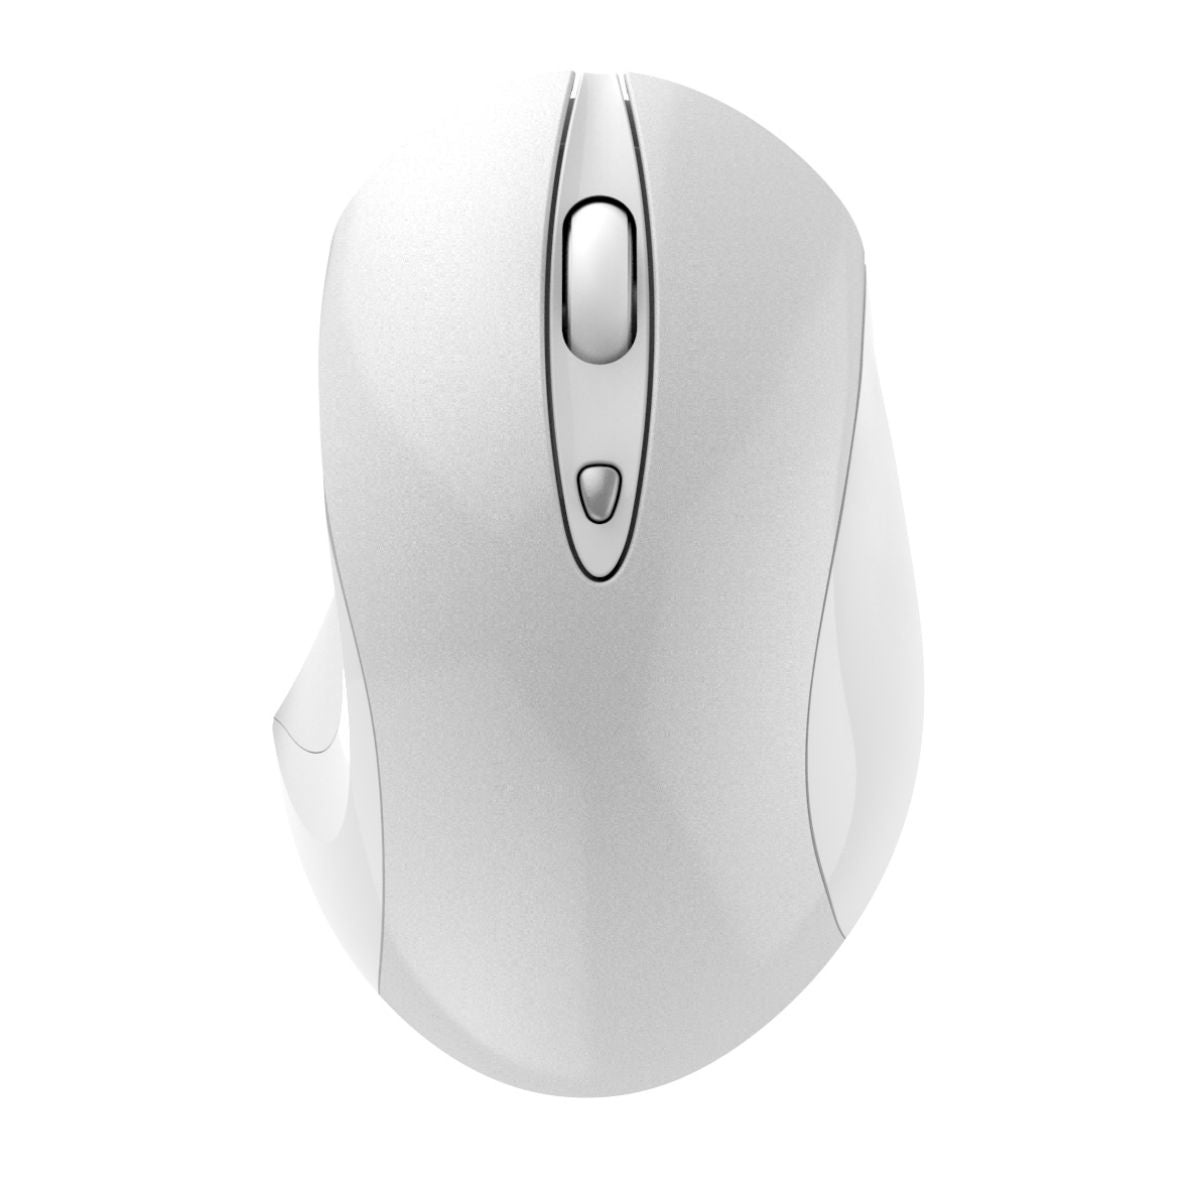 INDENA G189 Wireless Mouse White - Hugmie